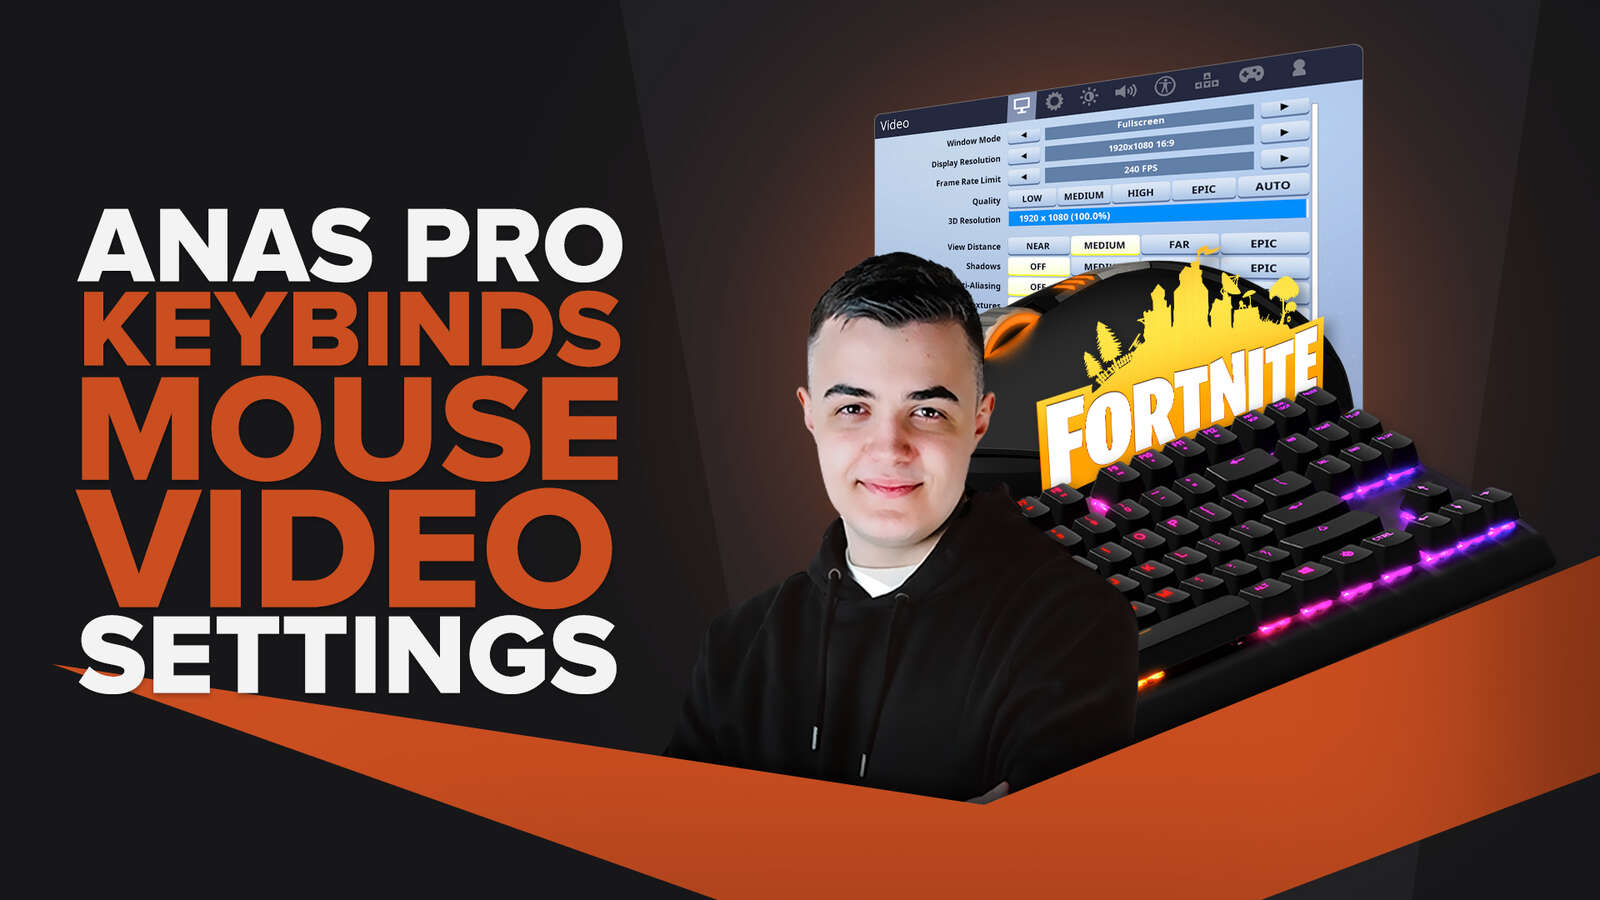 Anas | Keybinds, Mouse, Video Pro Fornite Settings